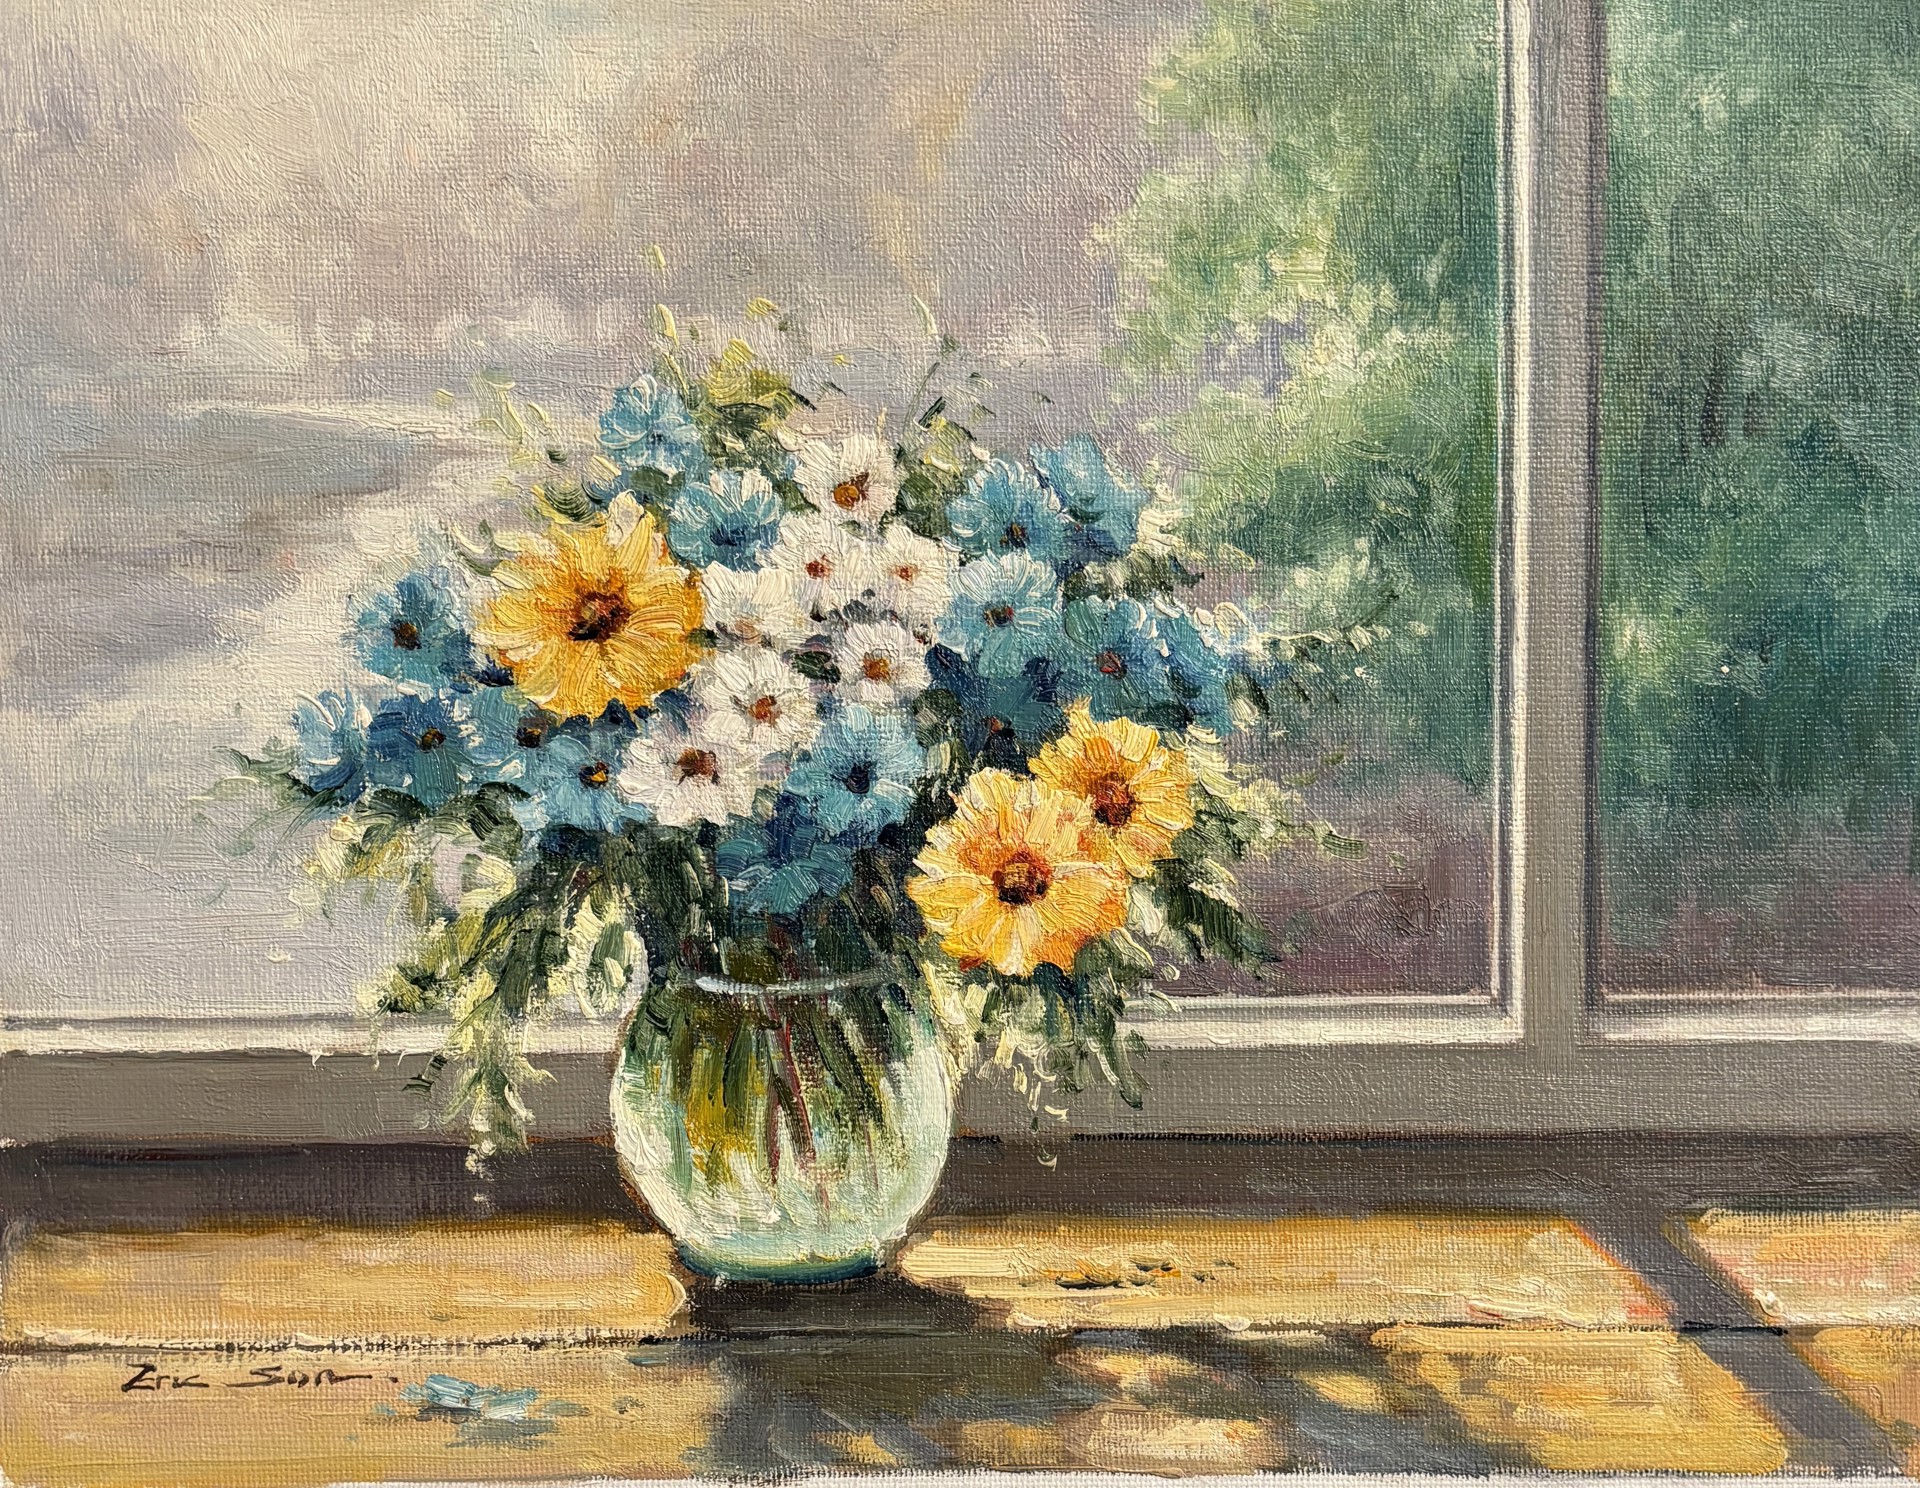 VASE OF FLOWERS ON THE 'SILL by ERIC SUN